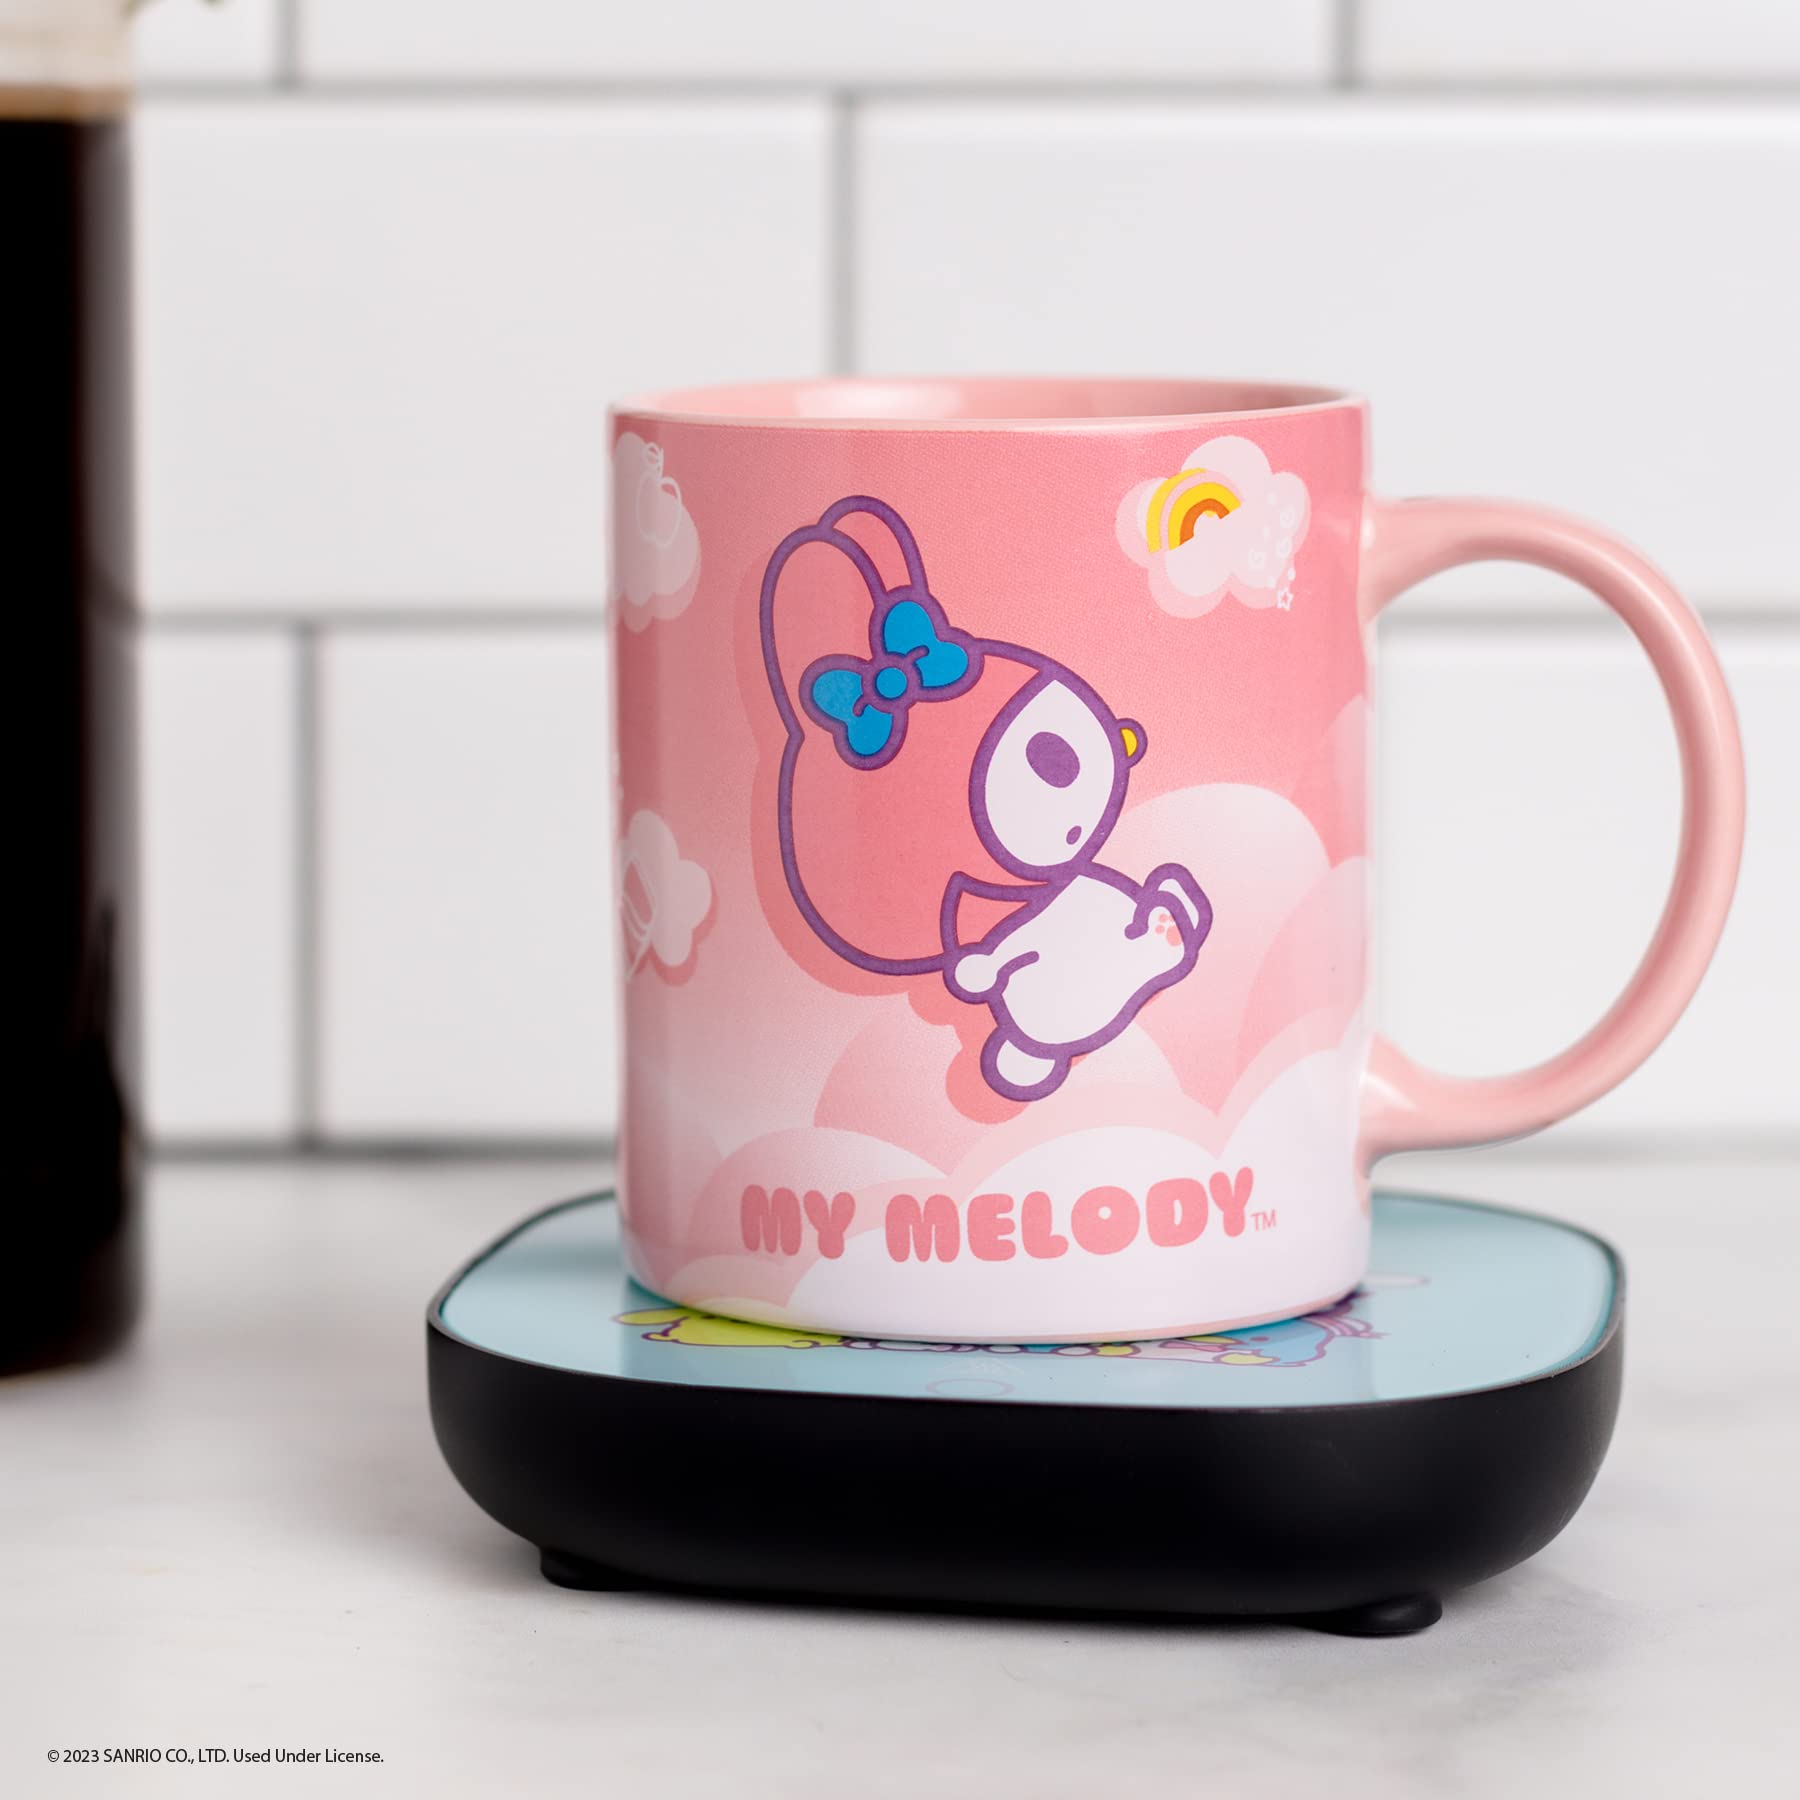 Uncanny Brands My Melody Coffee Mug with Electric Mug Warmer – Keeps Your Favorite Beverage Warm - Auto Shut On/Off